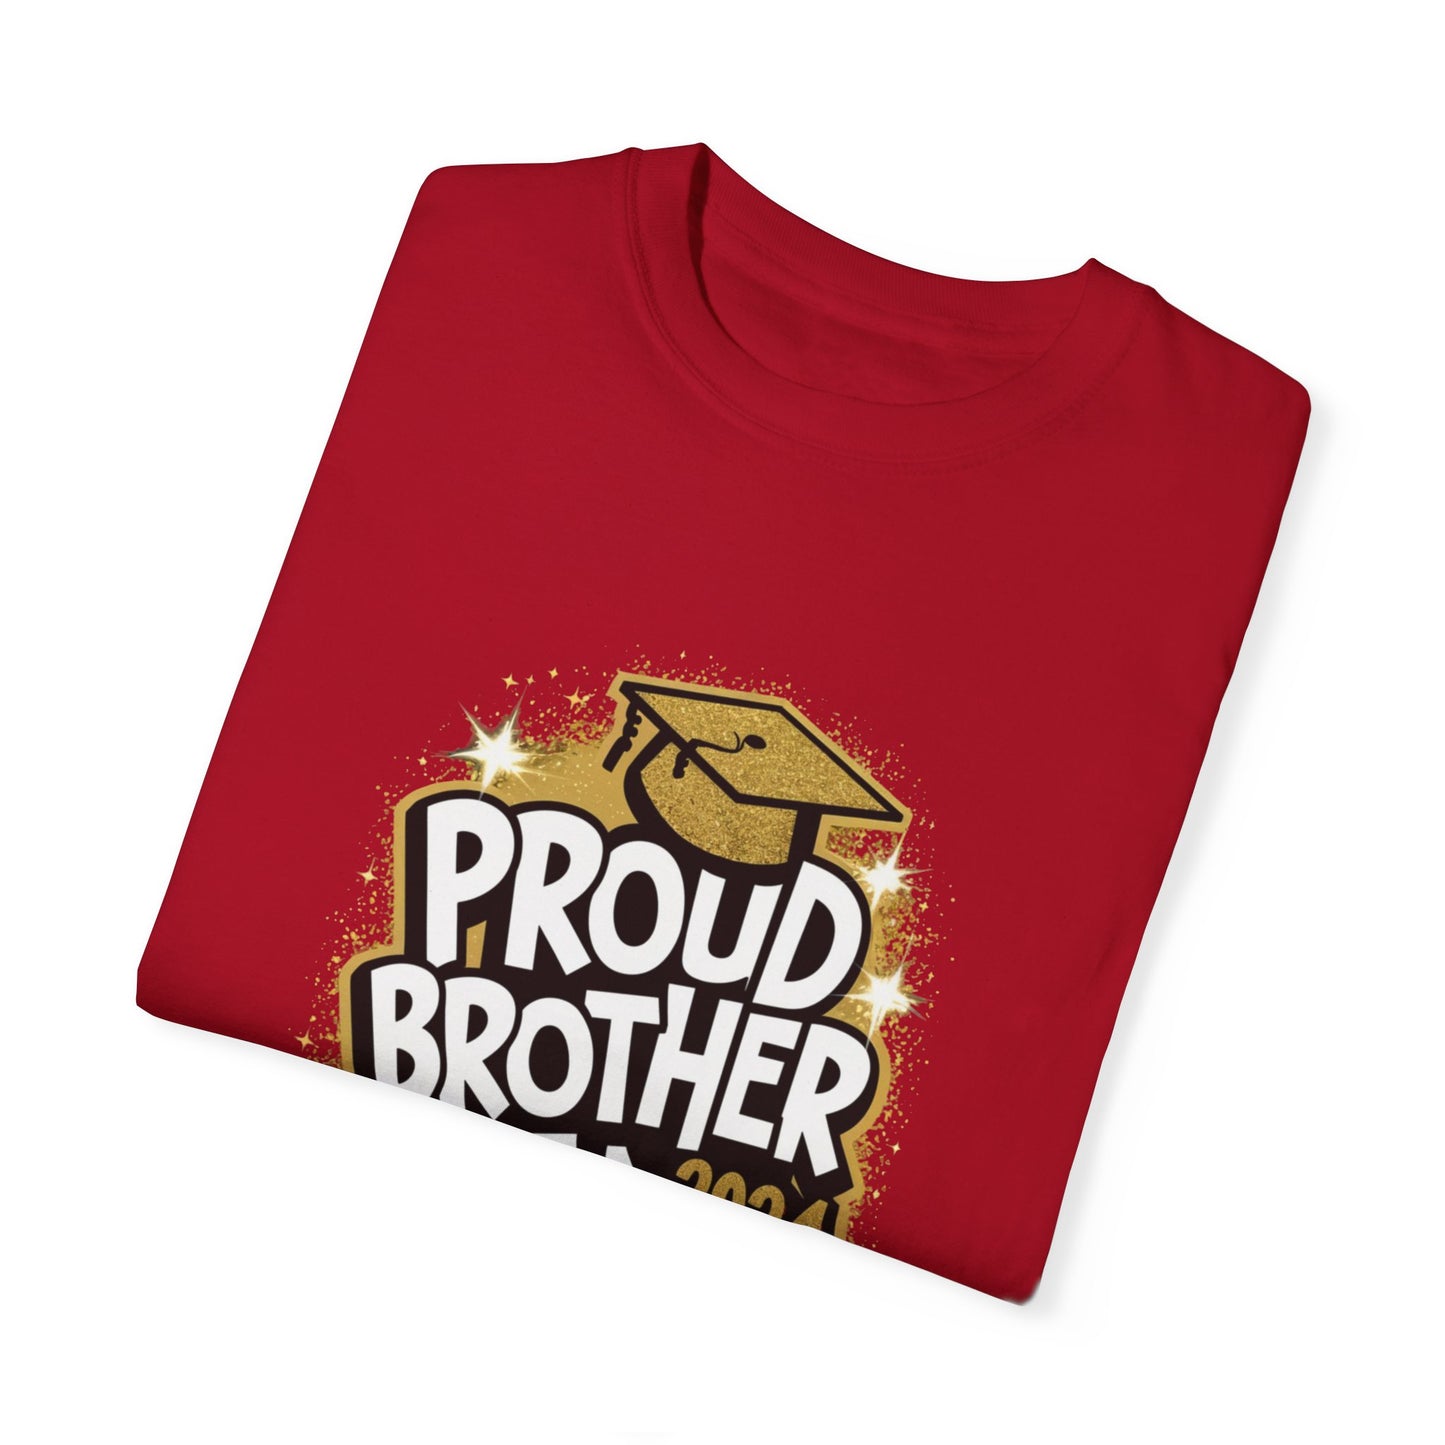 Proud Brother of a 2024 Graduate Unisex Garment-dyed T-shirt Cotton Funny Humorous Graphic Soft Premium Unisex Men Women Red T-shirt Birthday Gift-20